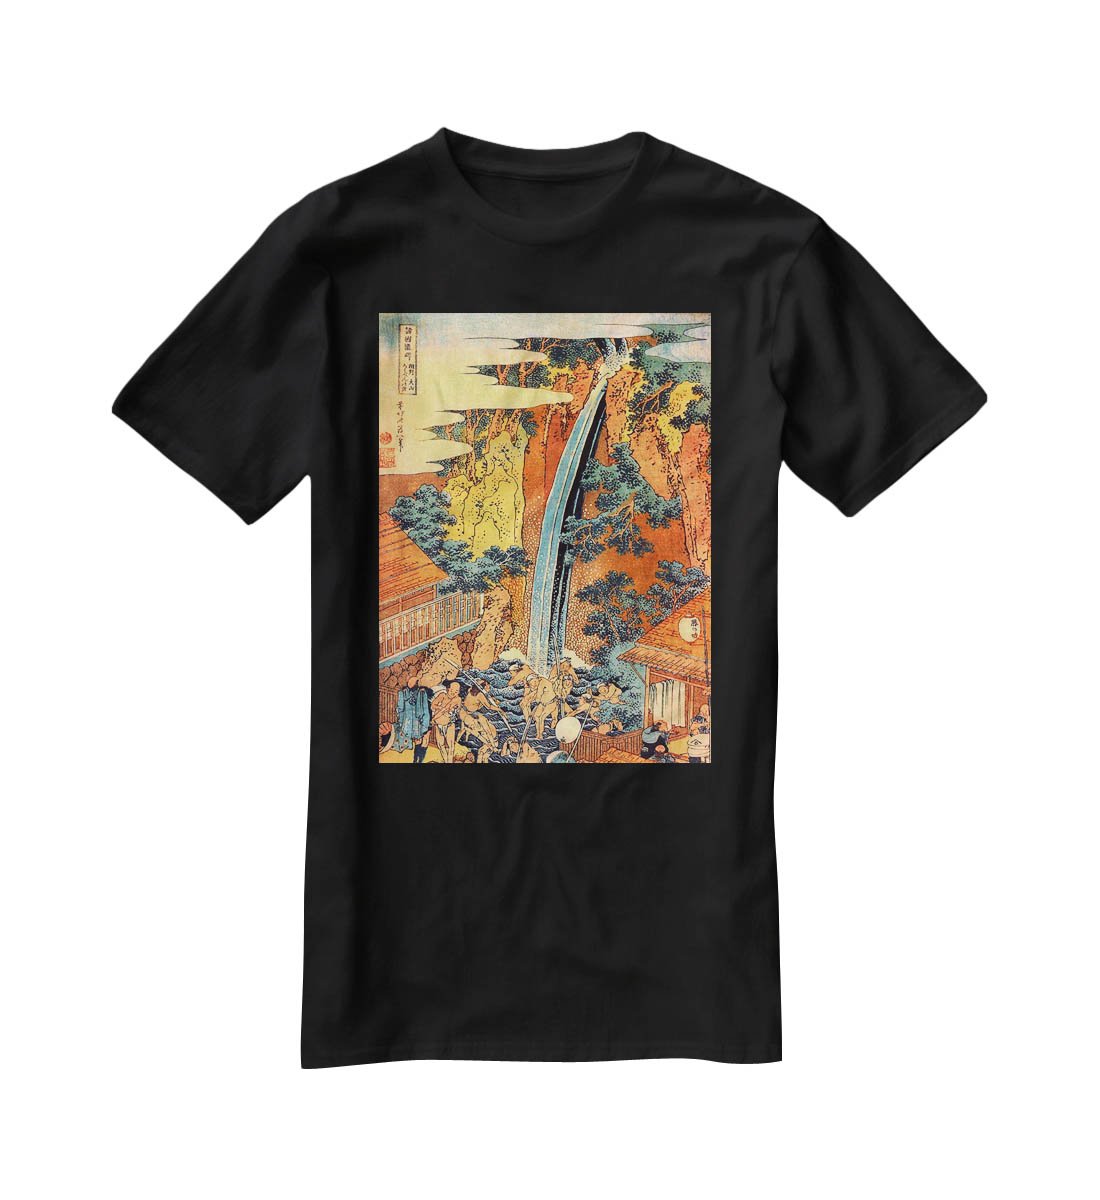 Waterfalls in all provinces 2 by Hokusai T-Shirt - Canvas Art Rocks - 1